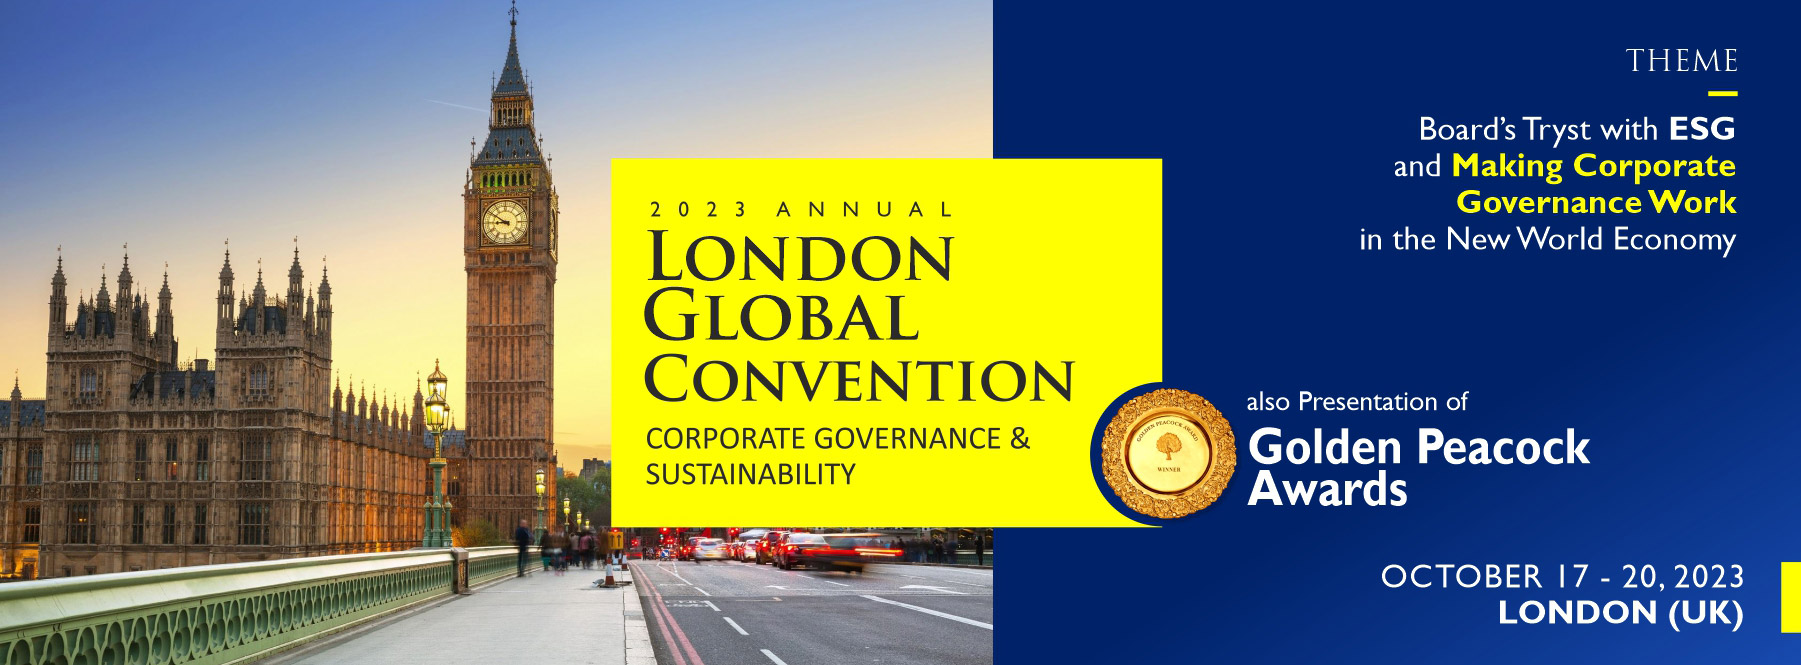 2023 London Global Convention Corporate Governance & Sustainability